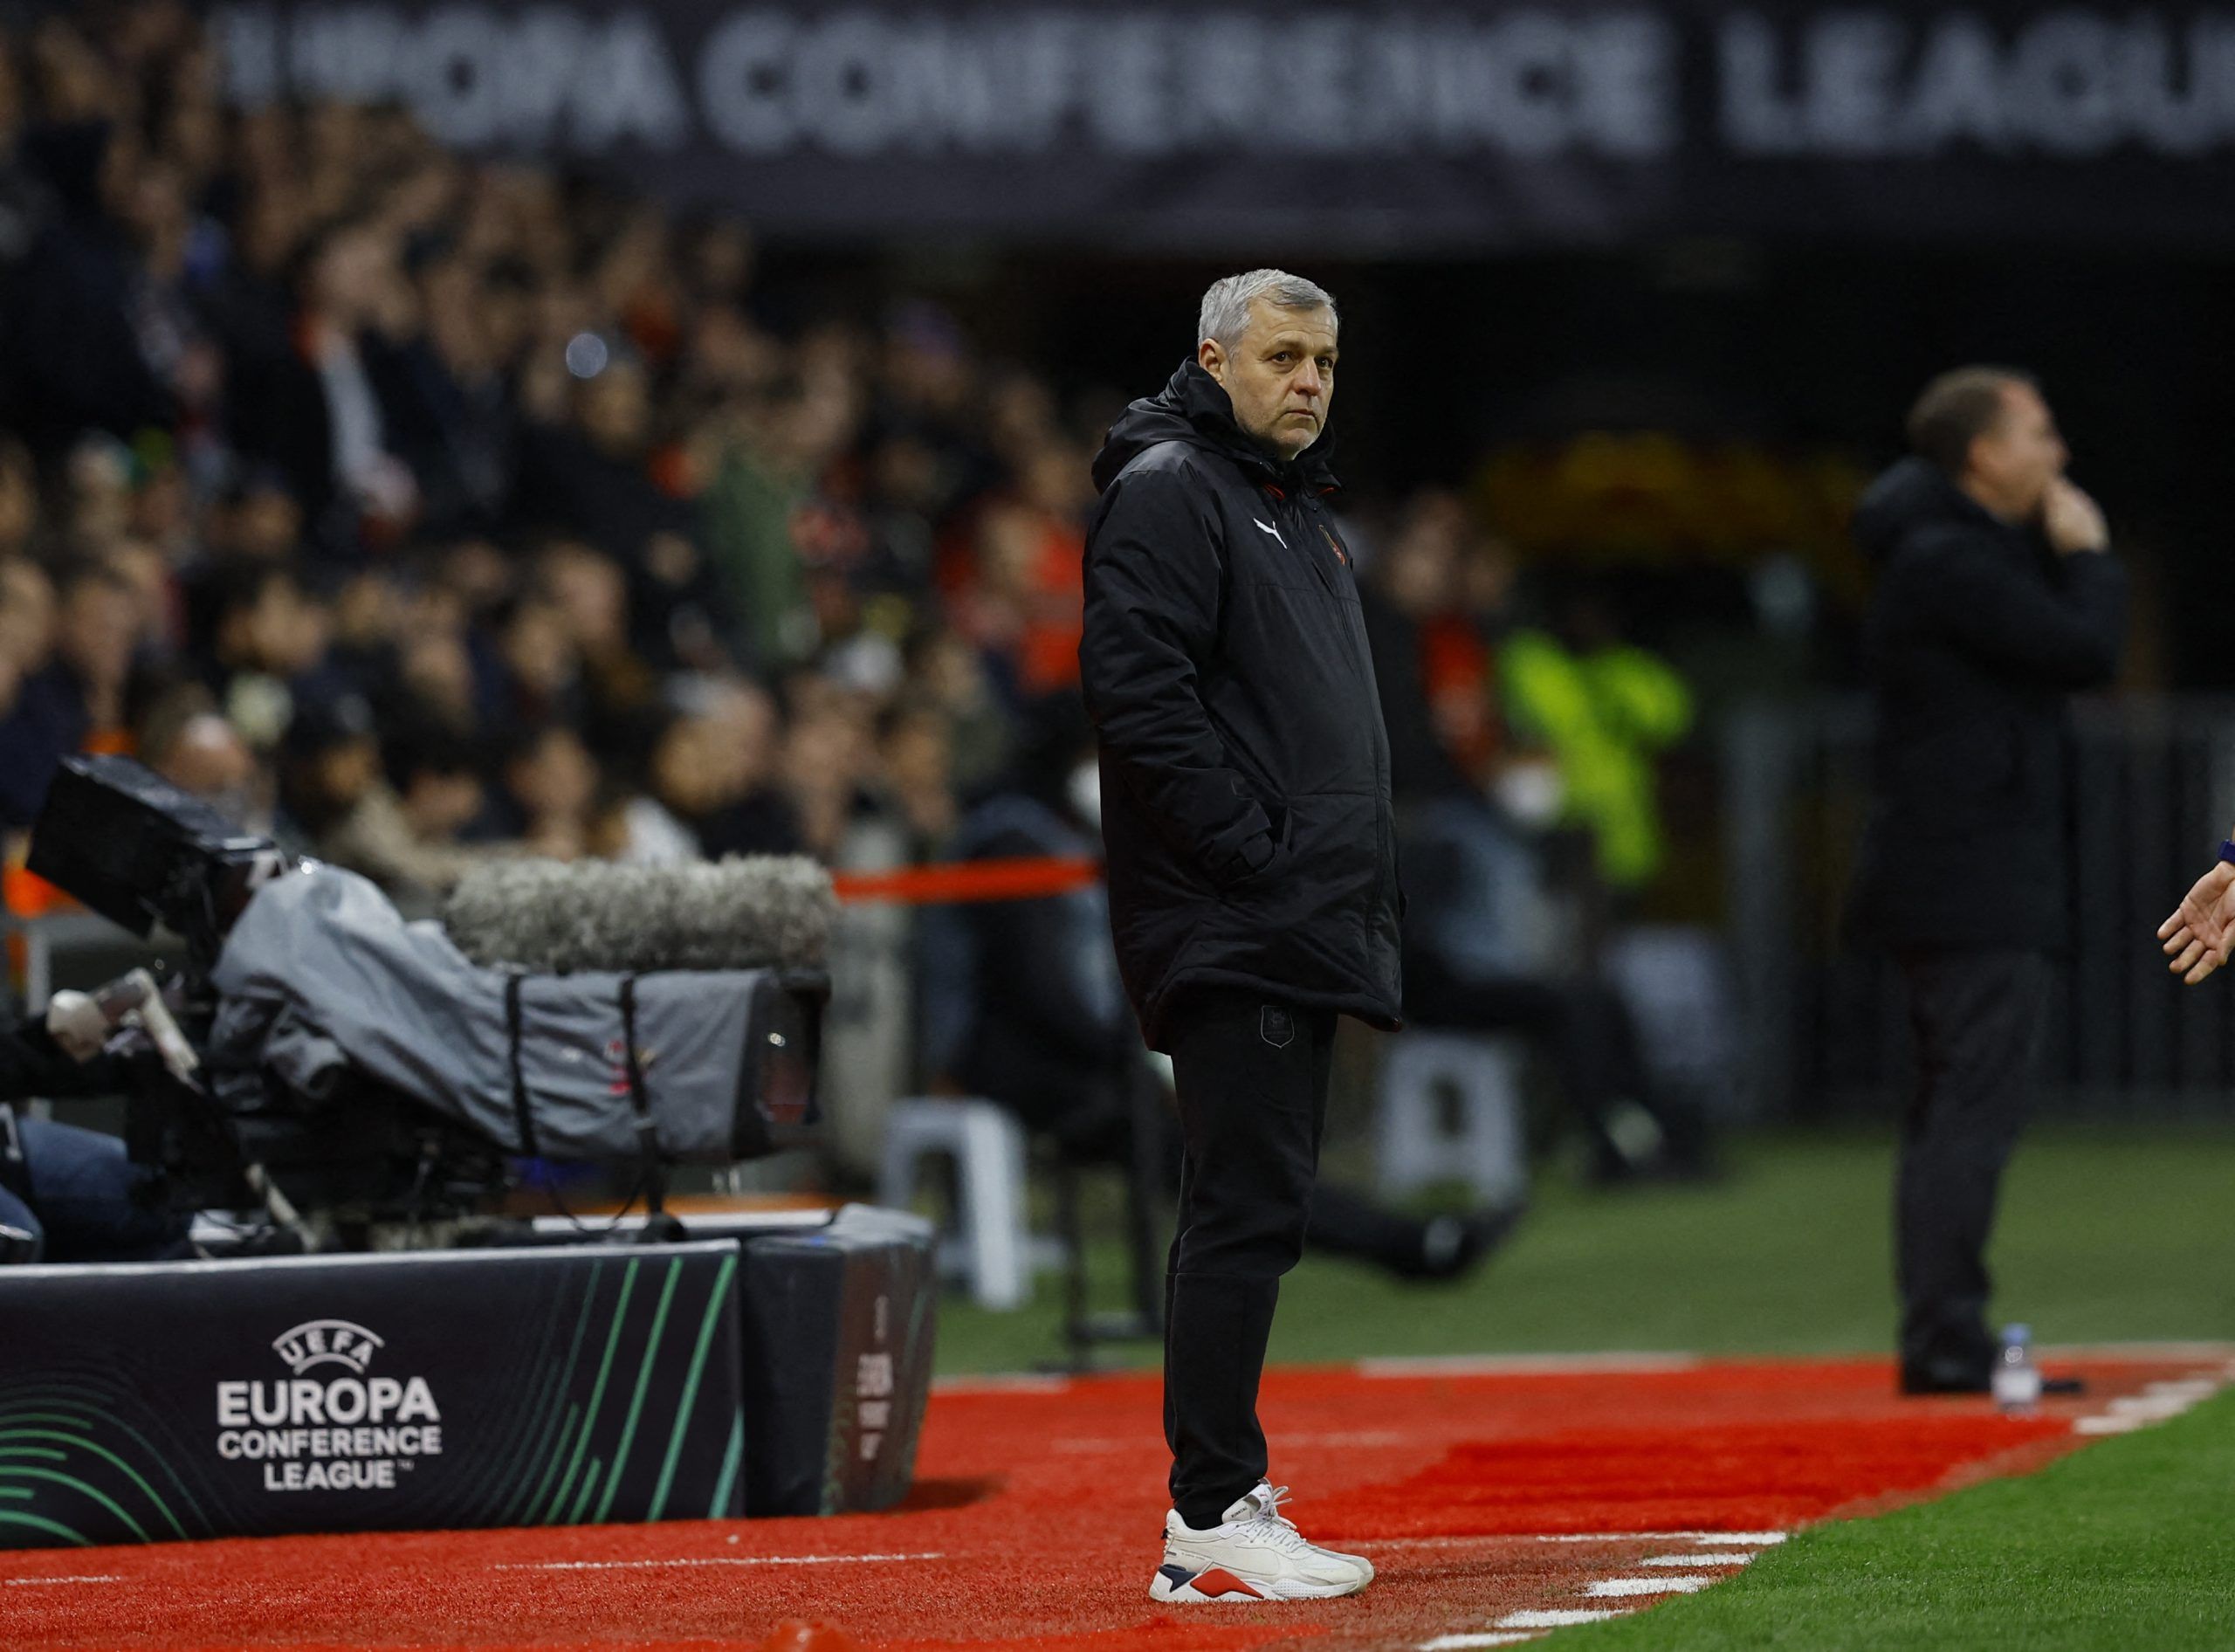 Soccer Football - Europa Conference League - Round of 16 Second Leg - Stade Rennes v Leicester City - Roazhon Park, Rennes, France - March 17, 2022 Stade Rennes coach Bruno Genesio